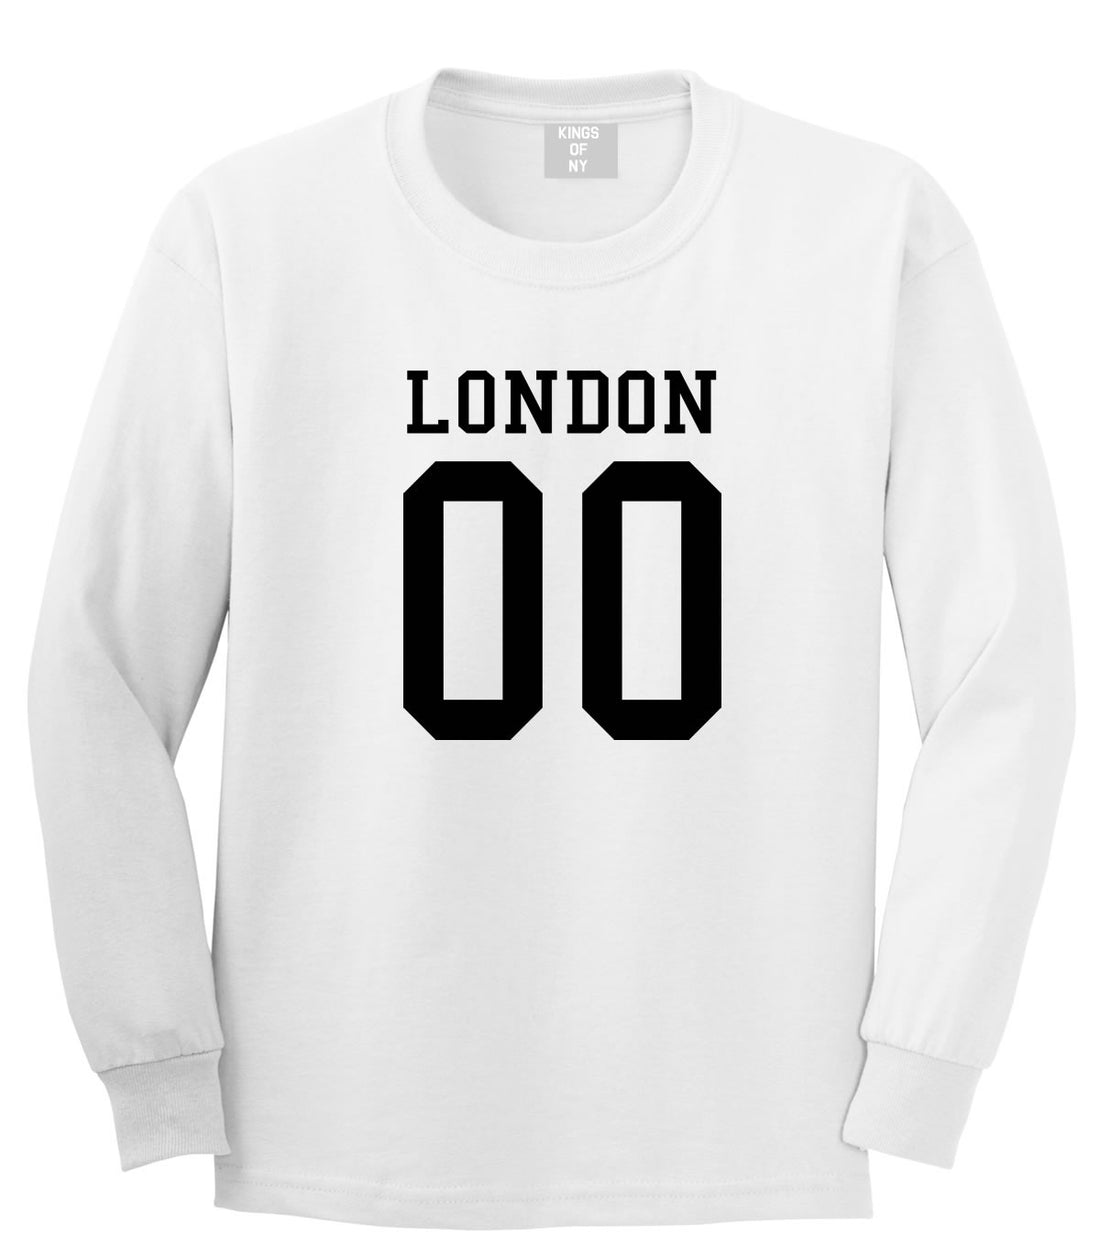 London Team 00 Jersey Long Sleeve T-Shirt in White By Kings Of NY